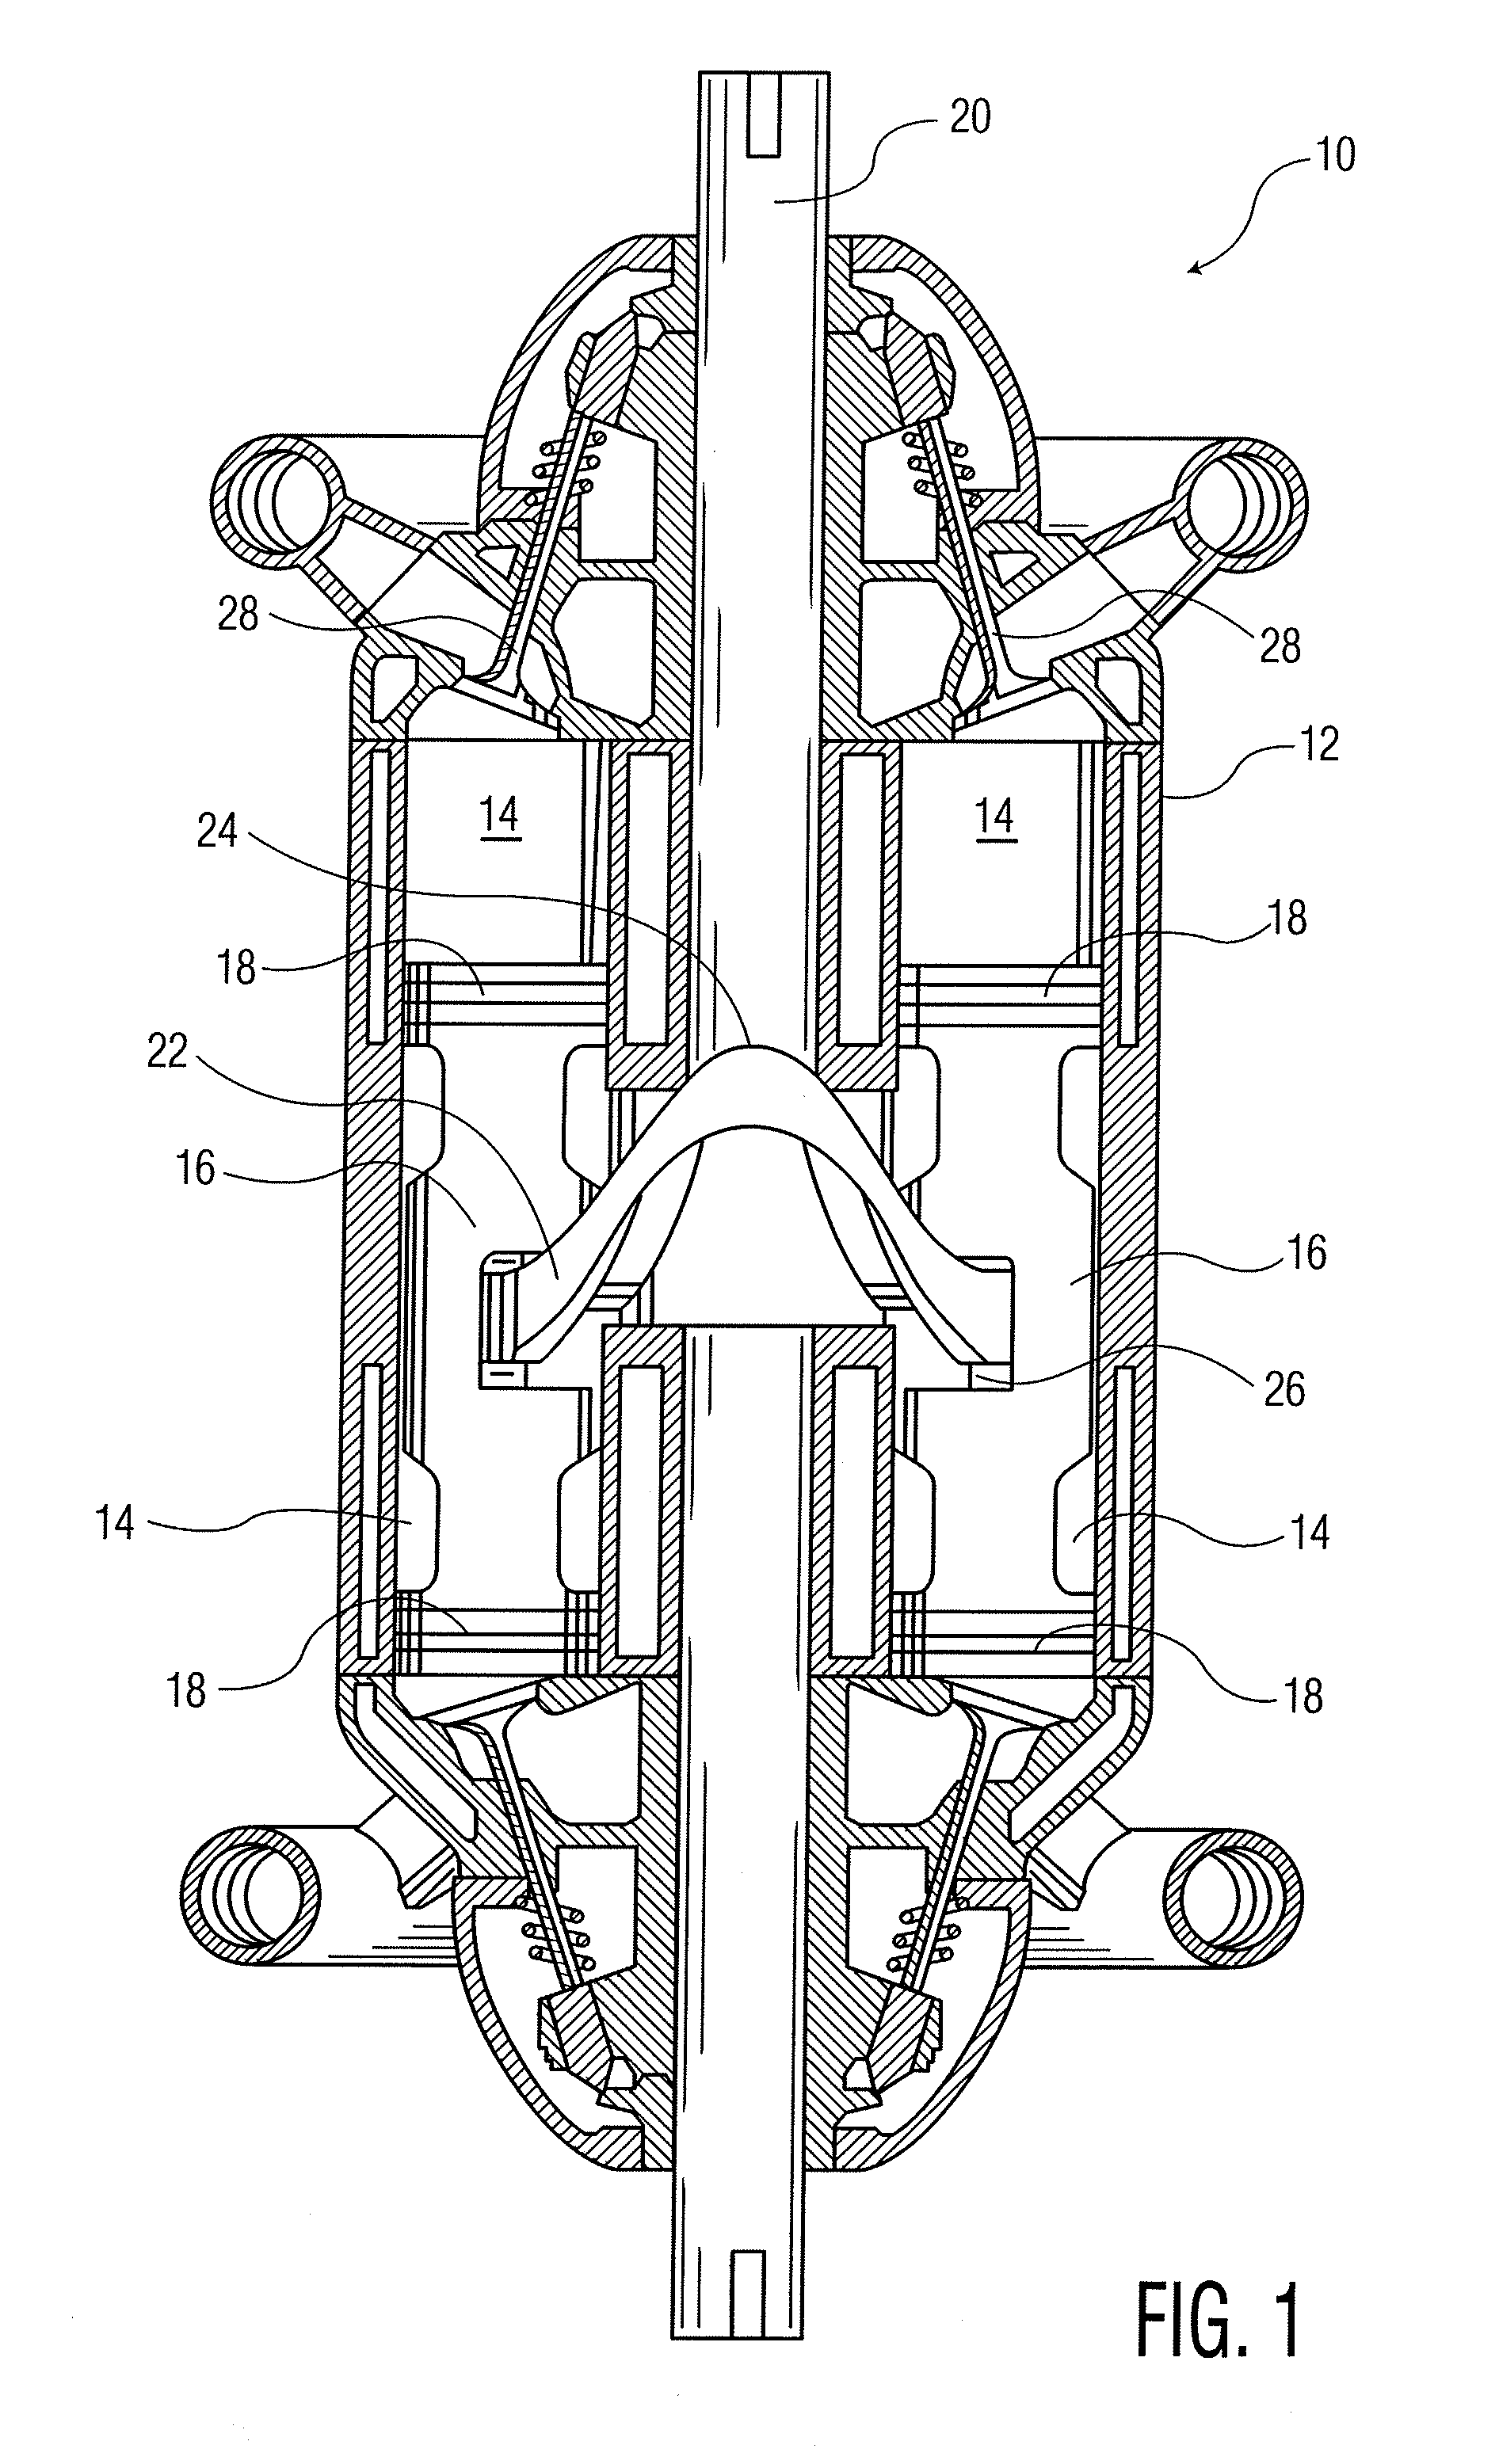 Barrel-type internal combustion engine and/or piston actuated compressor with optimal piston motion for increased efficiency